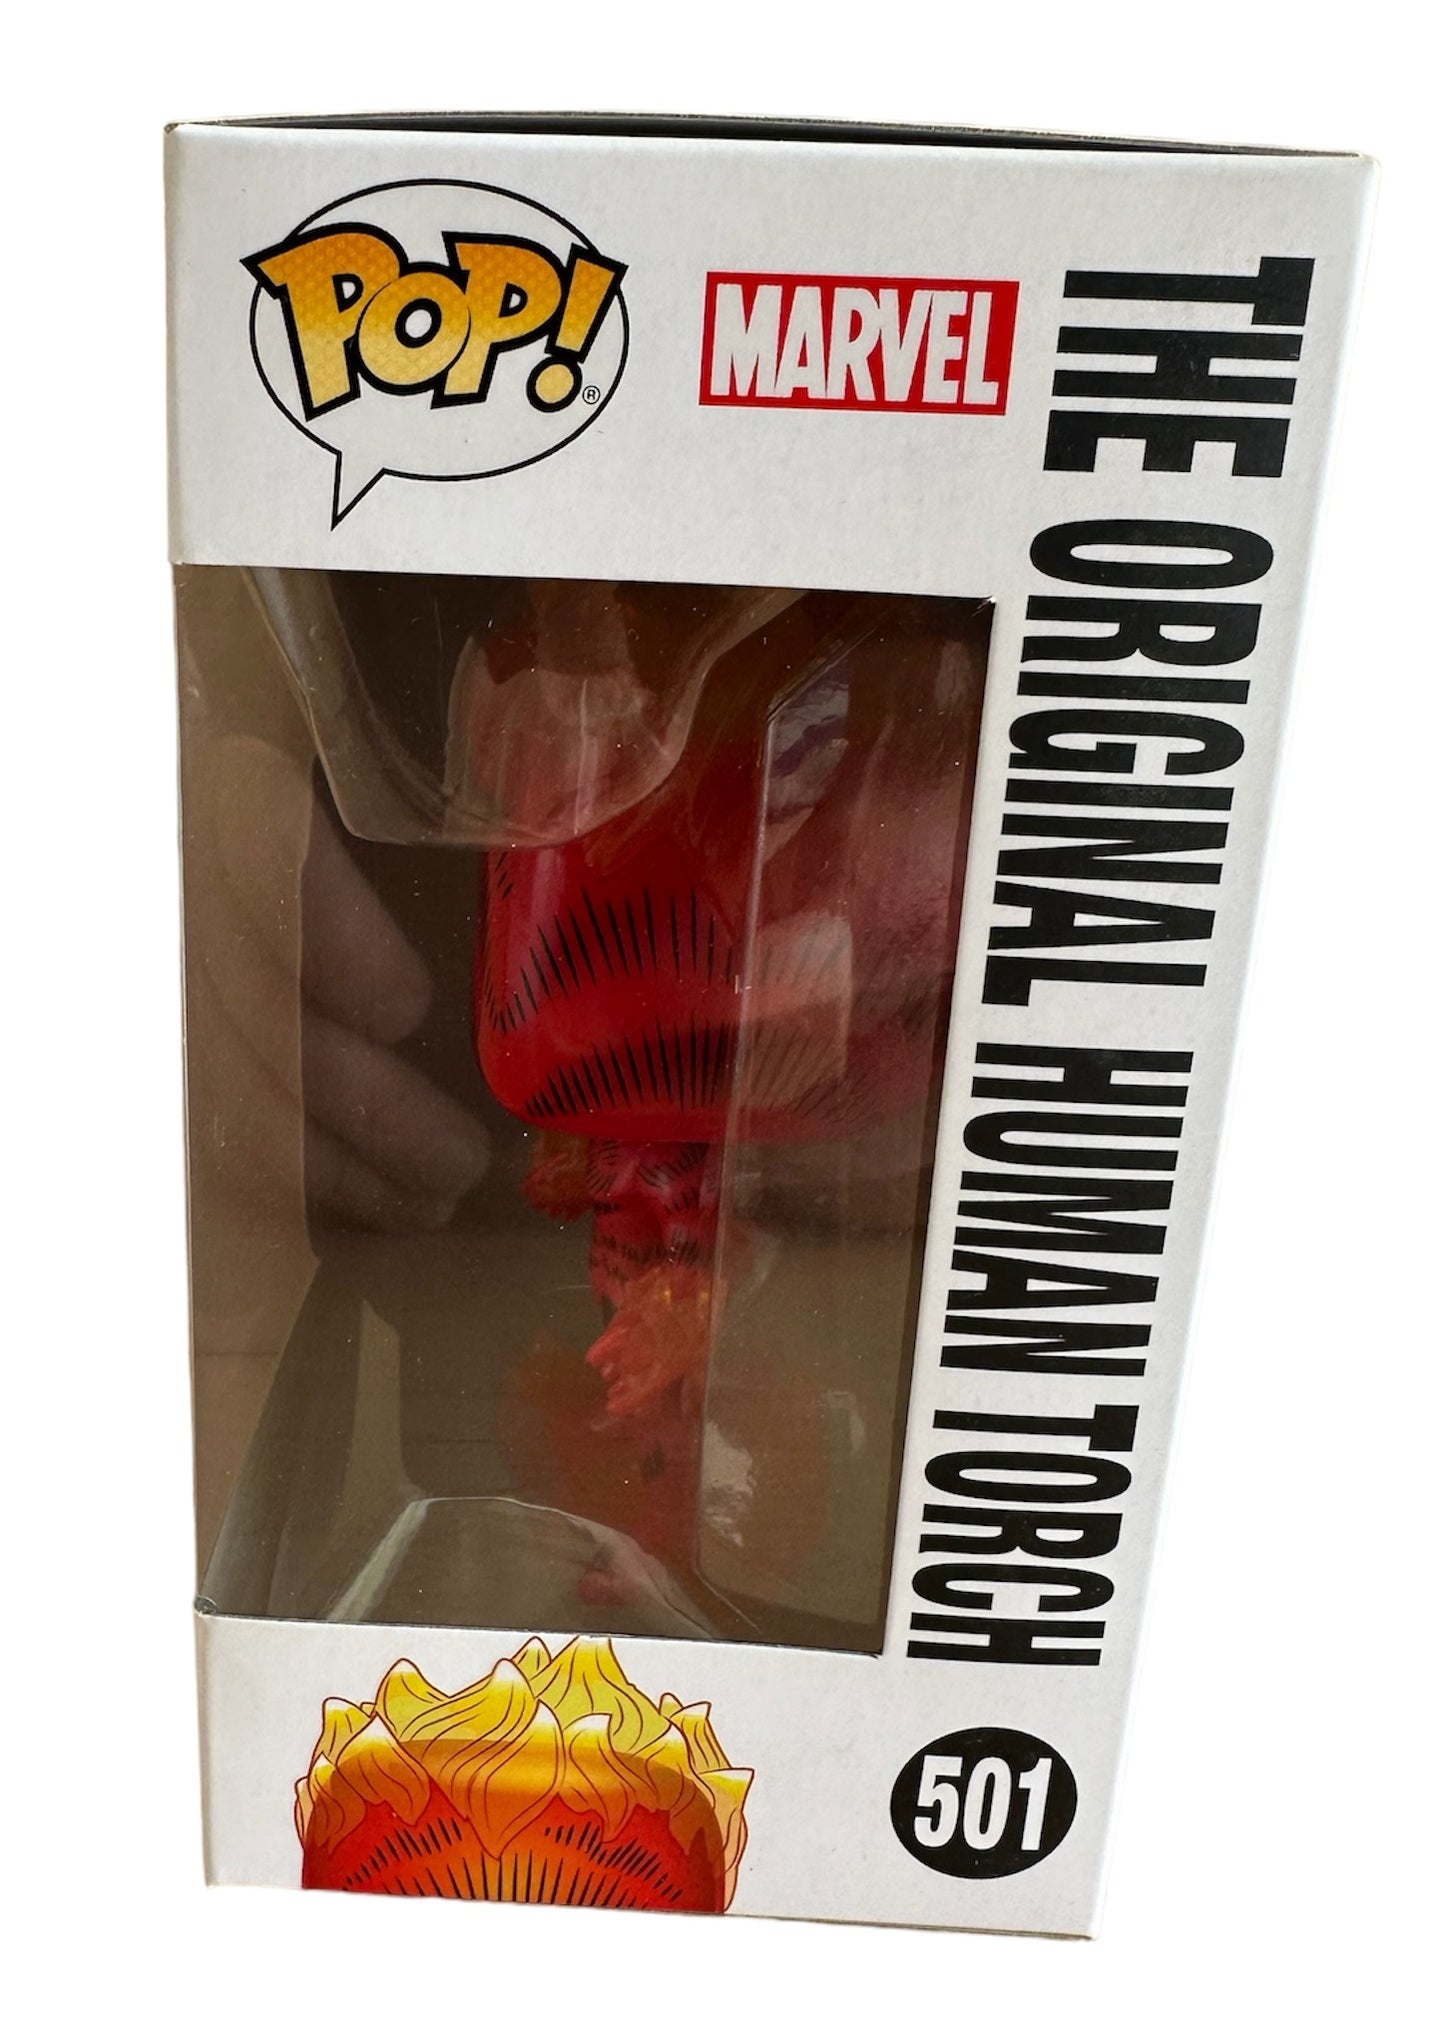 POP! 2019 Marvels 80 Years First Appearance Funko Pop Vinyl Figure - The Original Human Torch Bobble-Head No. 501 - Brand New Shop Stock Room Find